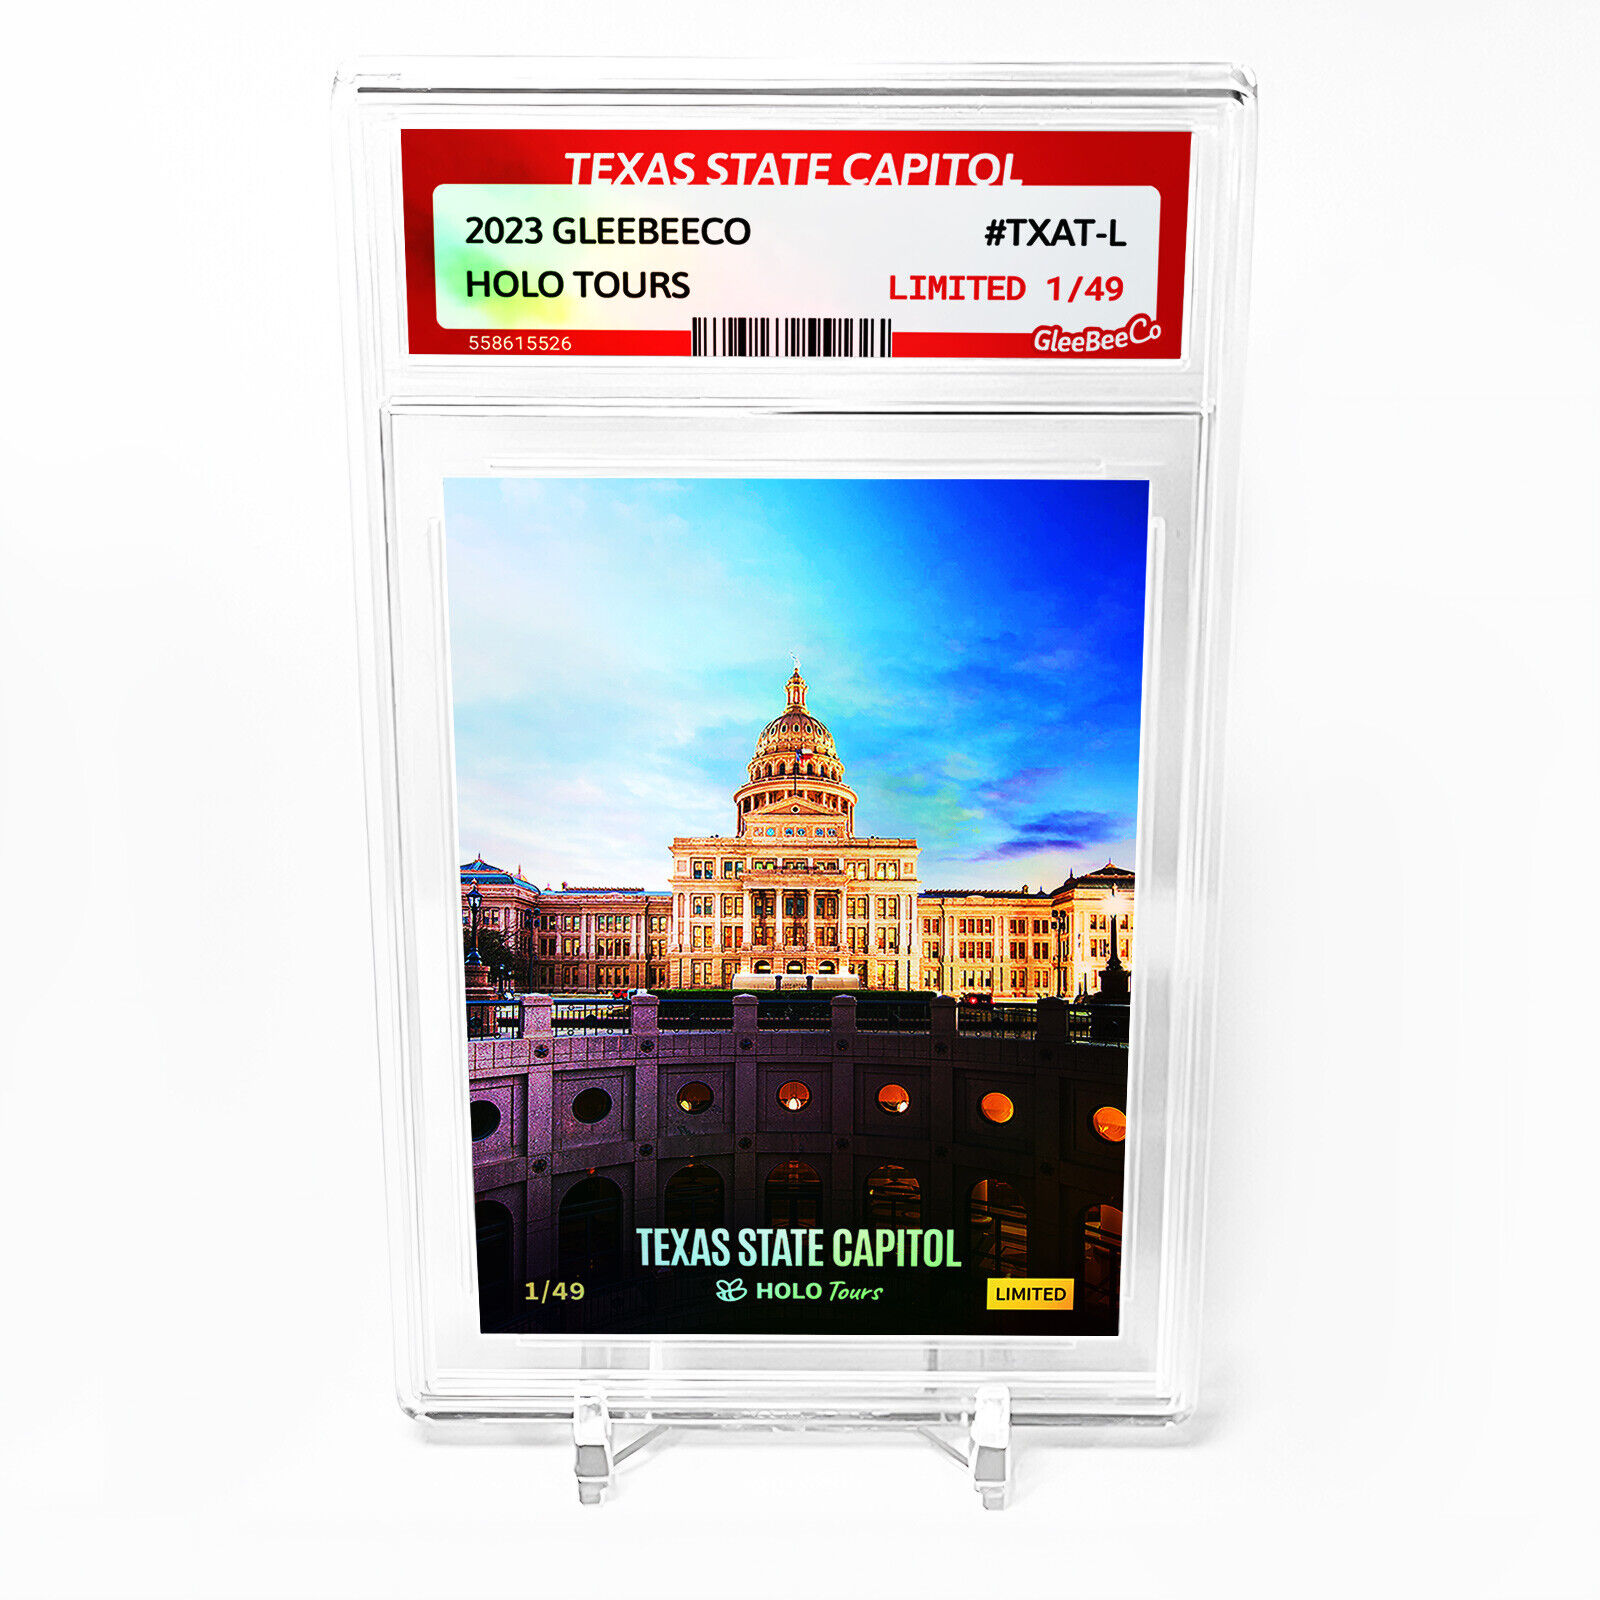 TEXAS STATE CAPITOL Card GleeBeeCo Holo Tours Austin #TXAT-L Limited to Only /49